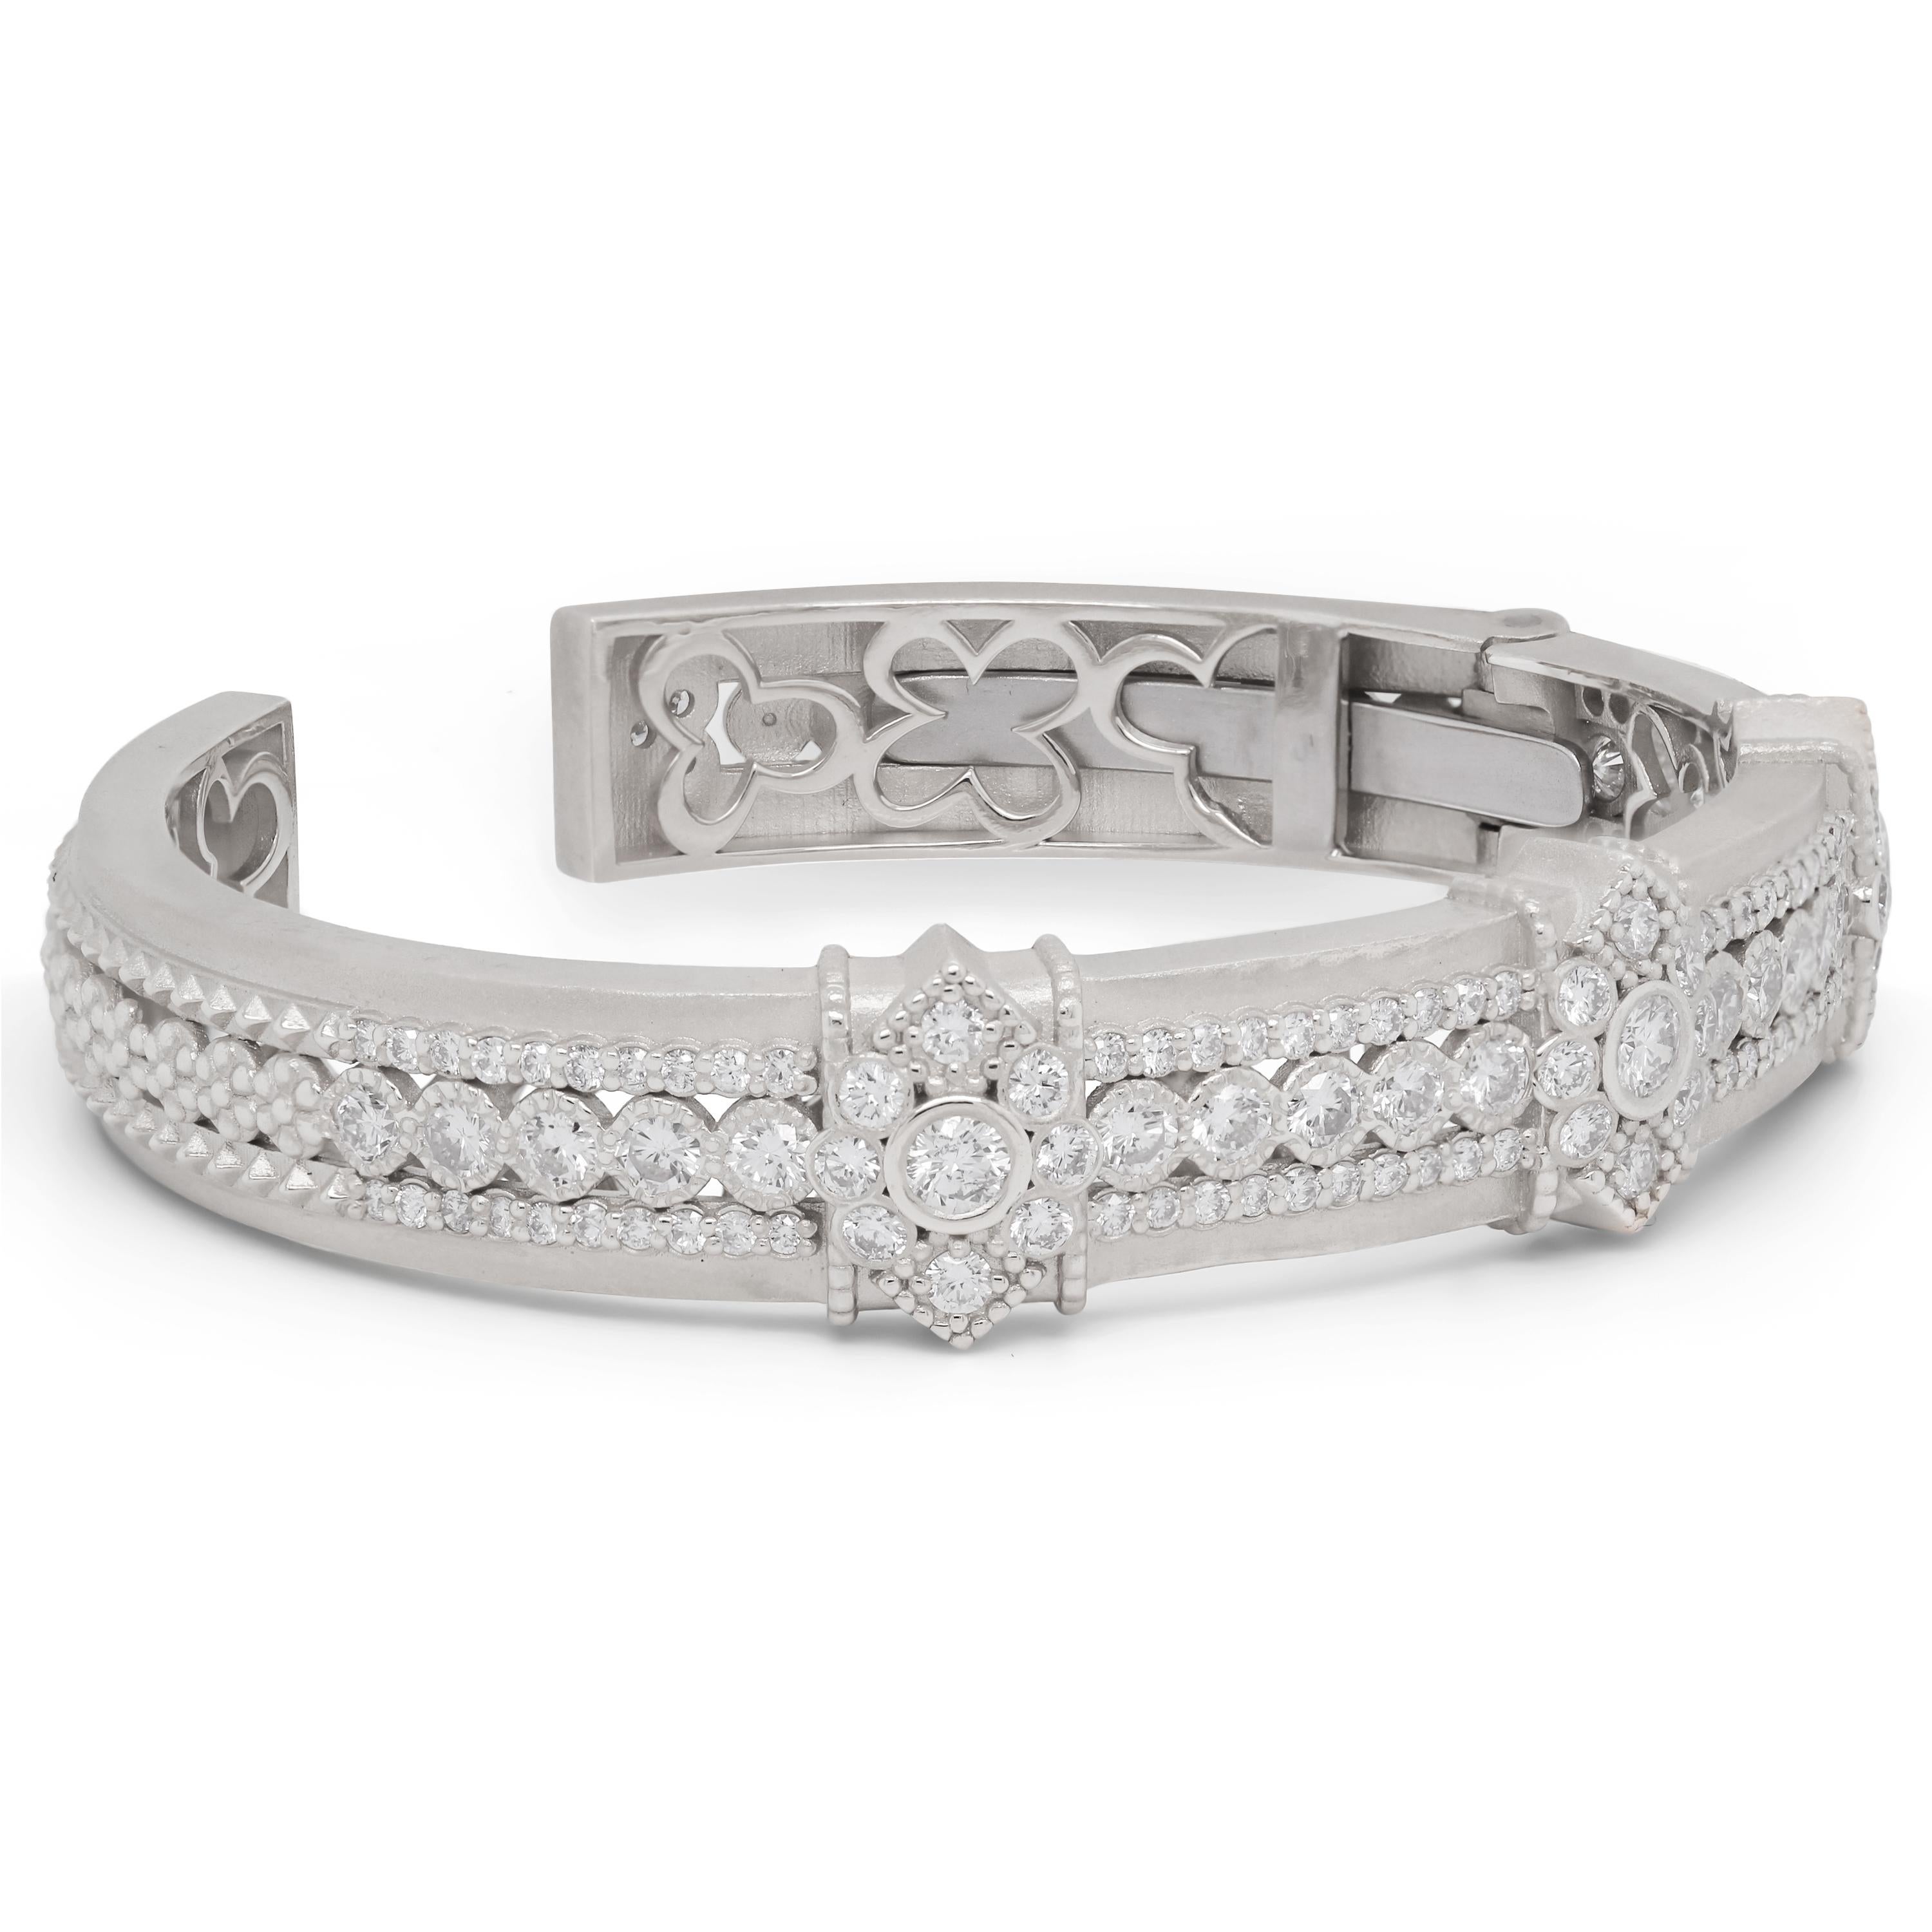 Stambolian 18K White Gold and Diamond Bangle Bracelet

This state-of-the-art, handmade bracelet showcases the craftsmanship and design all throughout the piece. Diamonds are set on just about every aspect of his bangle. 

Apprx. 3.46 carat G color,